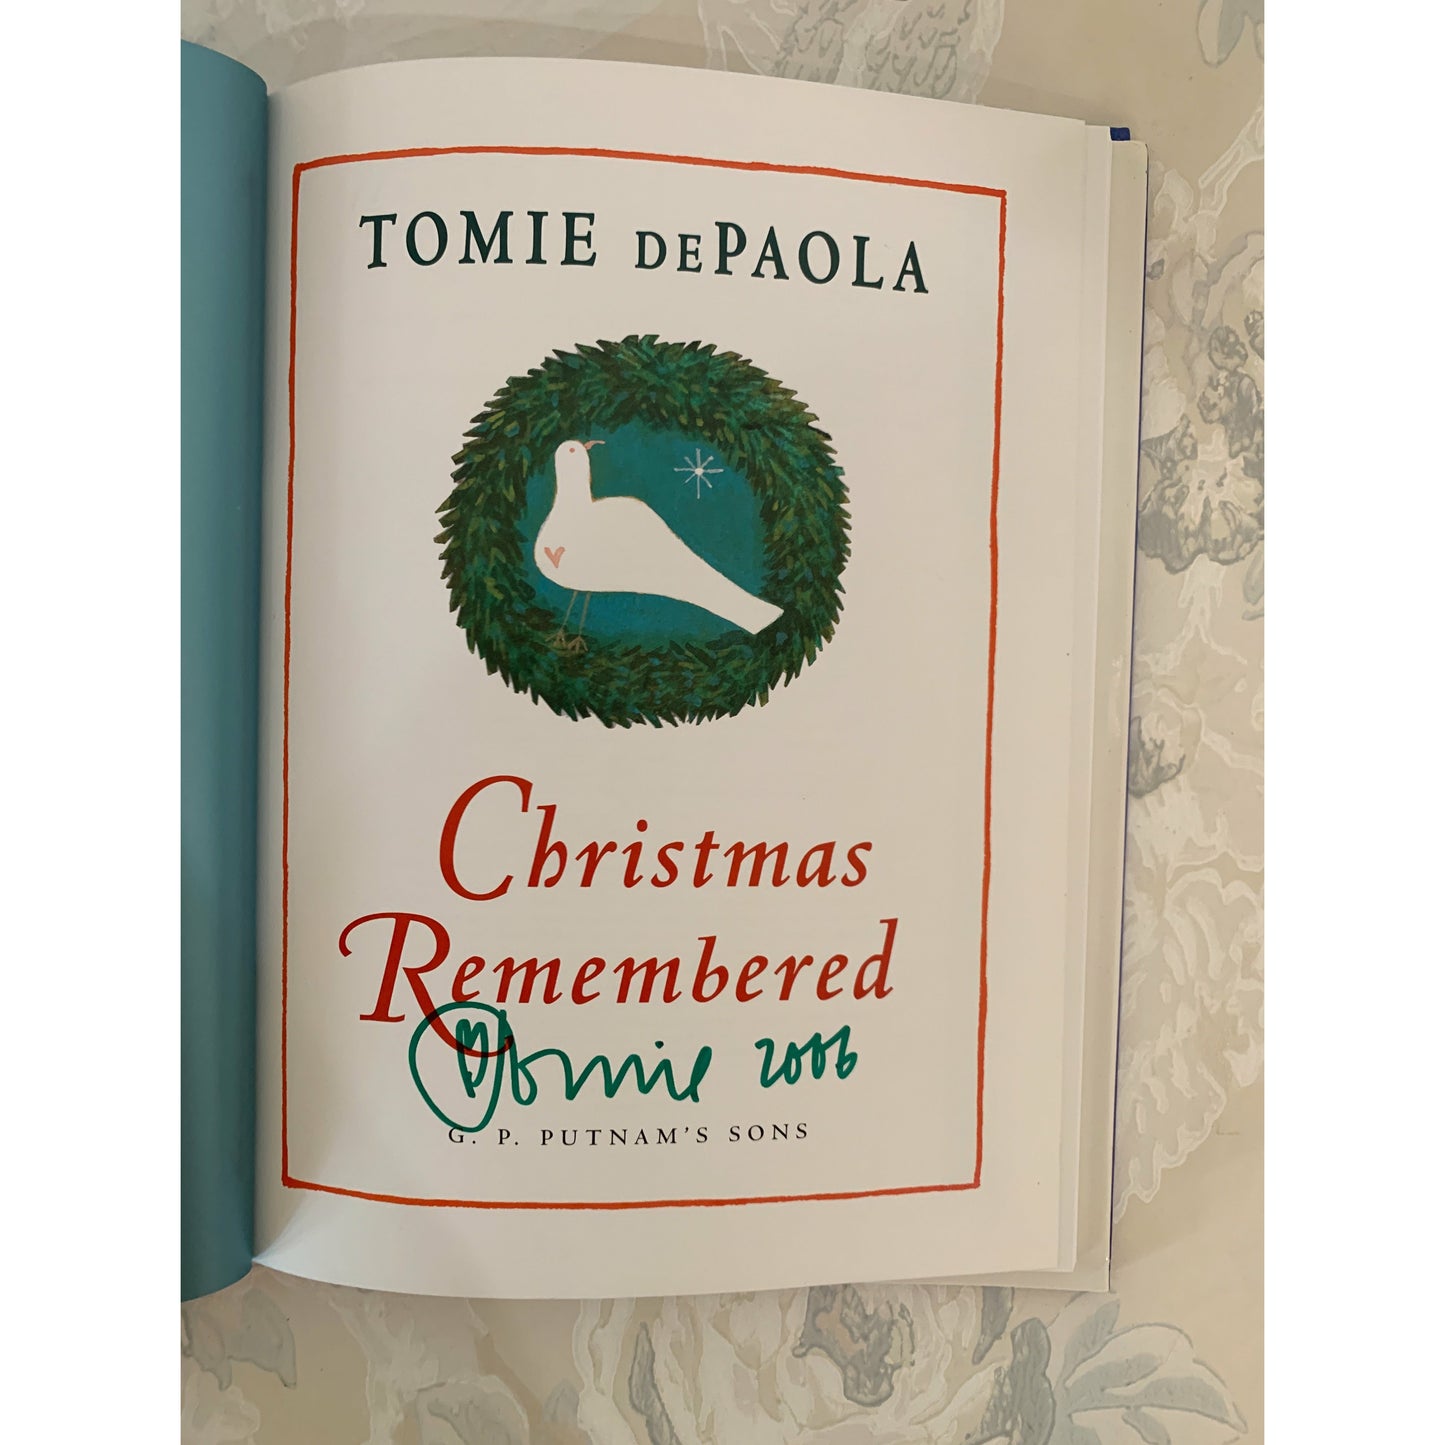 SIGNED First Edition Christmas Remembered, Tomie dePaola Holiday Memoir, 2006